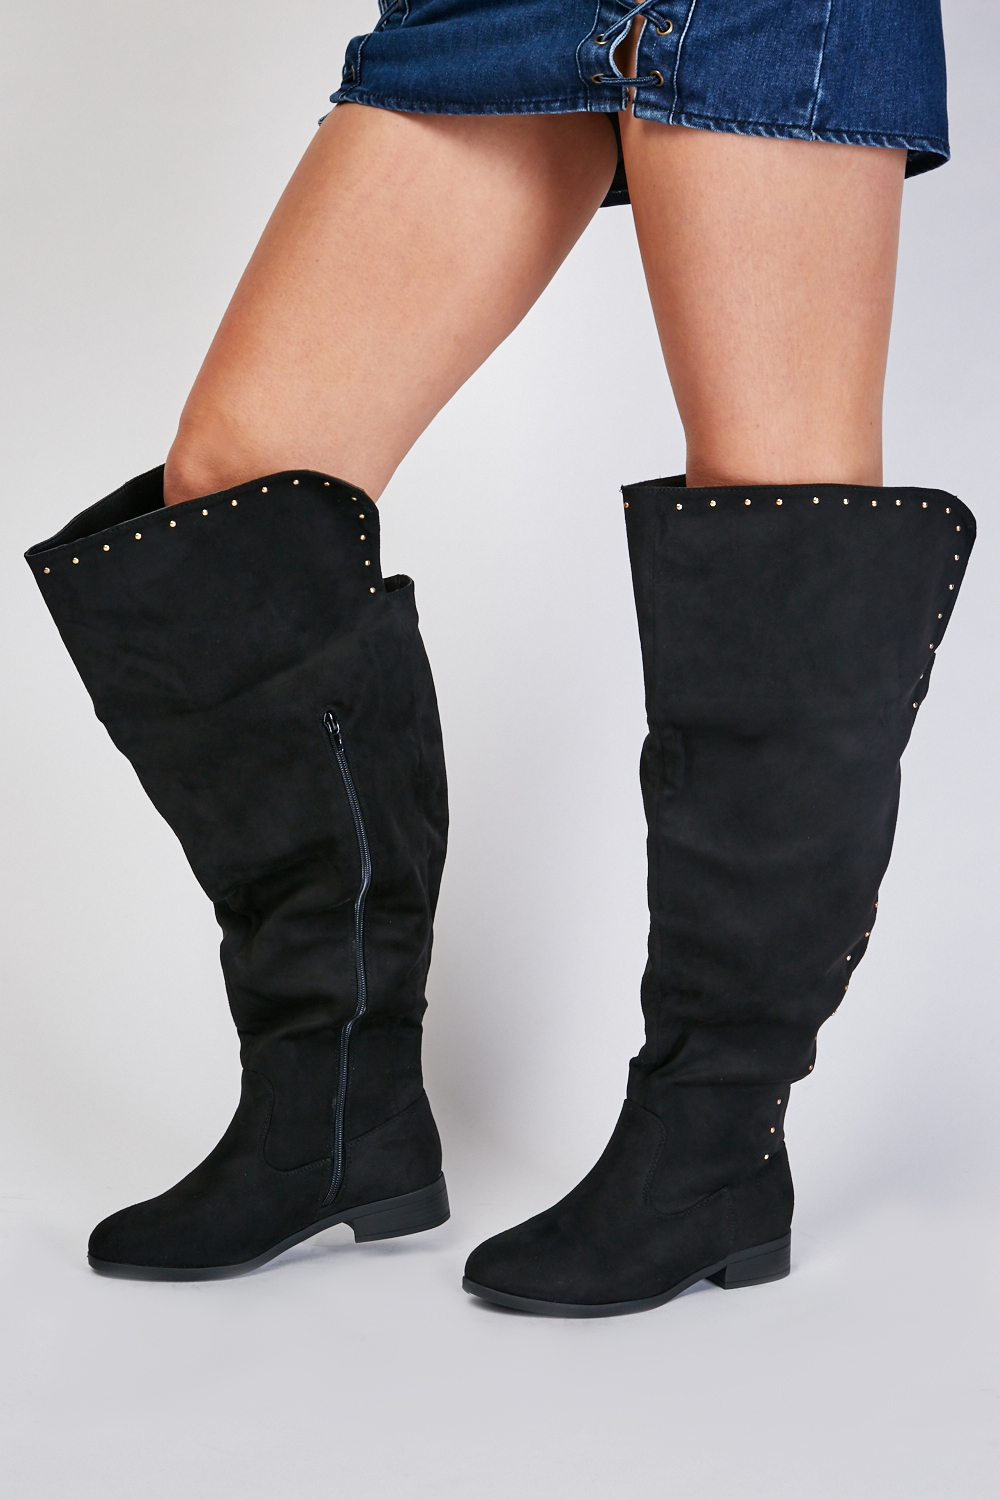 Suedette Studded Knee High Boots - Just $7